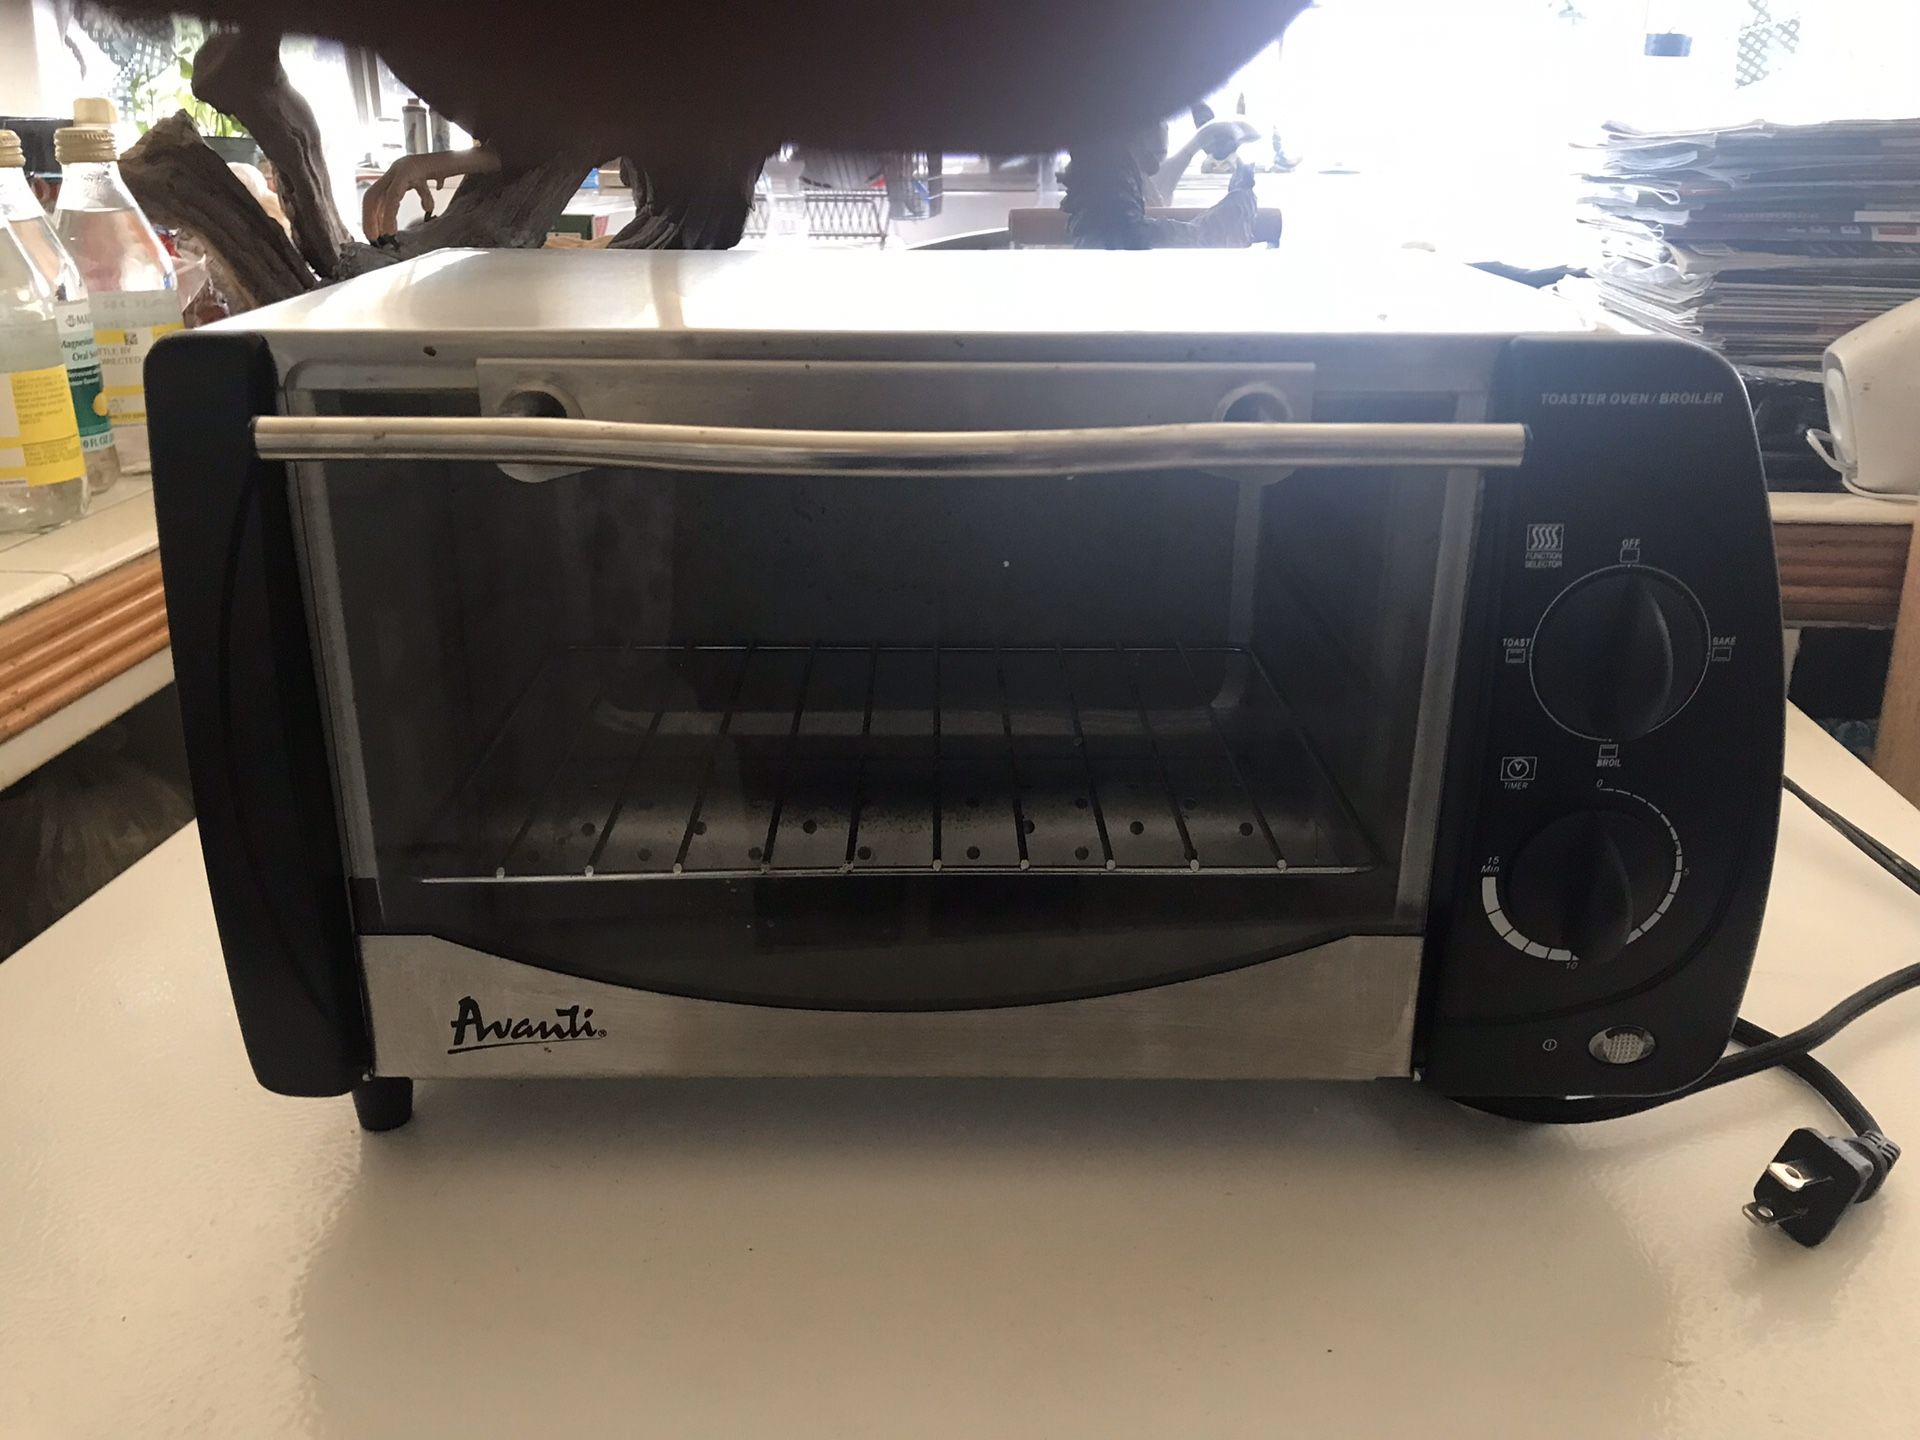 Toaster and coffee maker and oven toaster